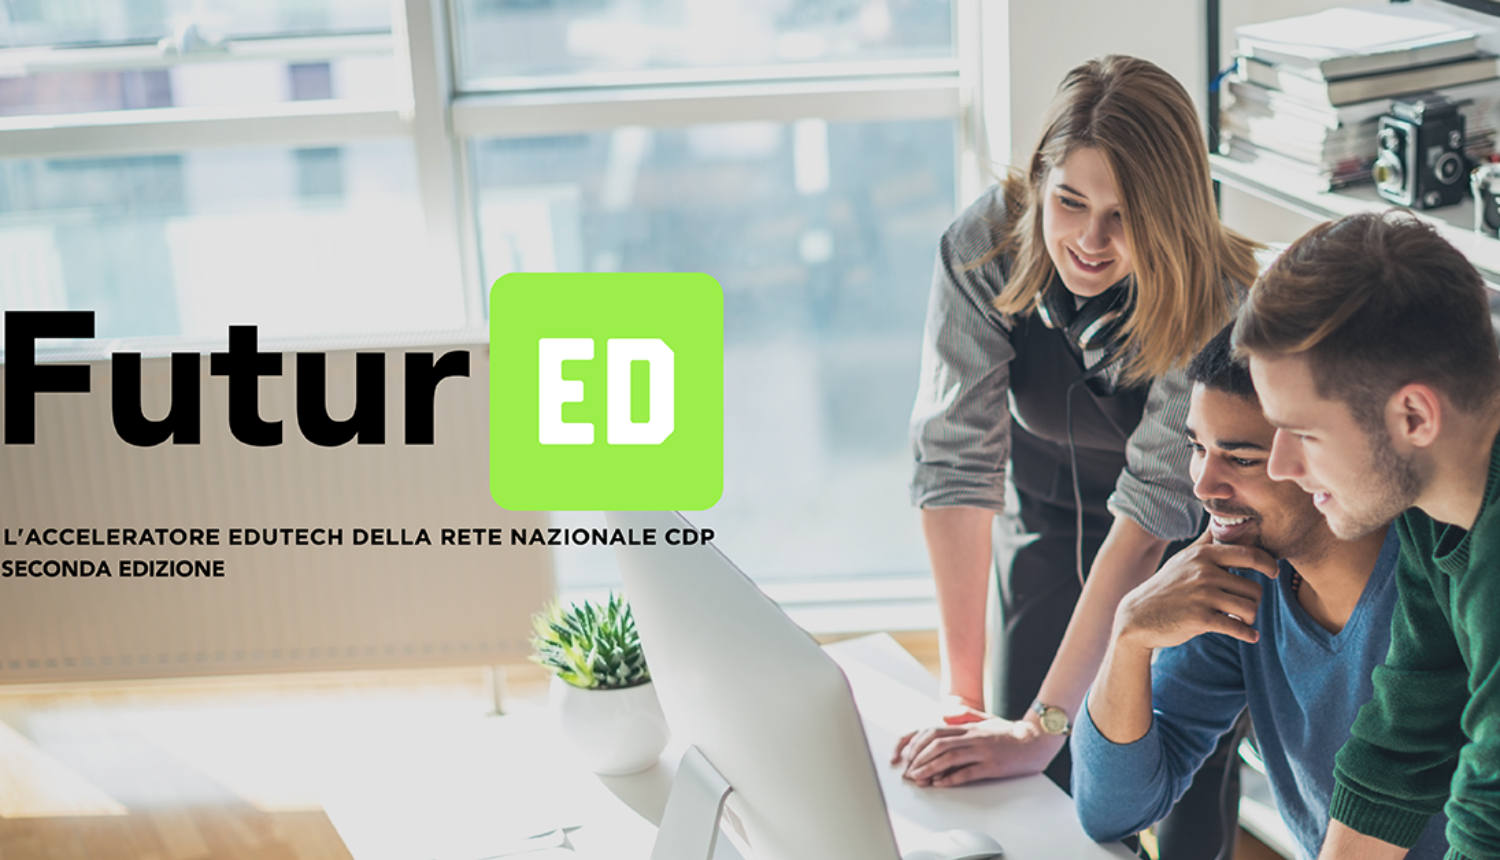 Second edition of FuturED, the edutech accelerator of the CDP National Network